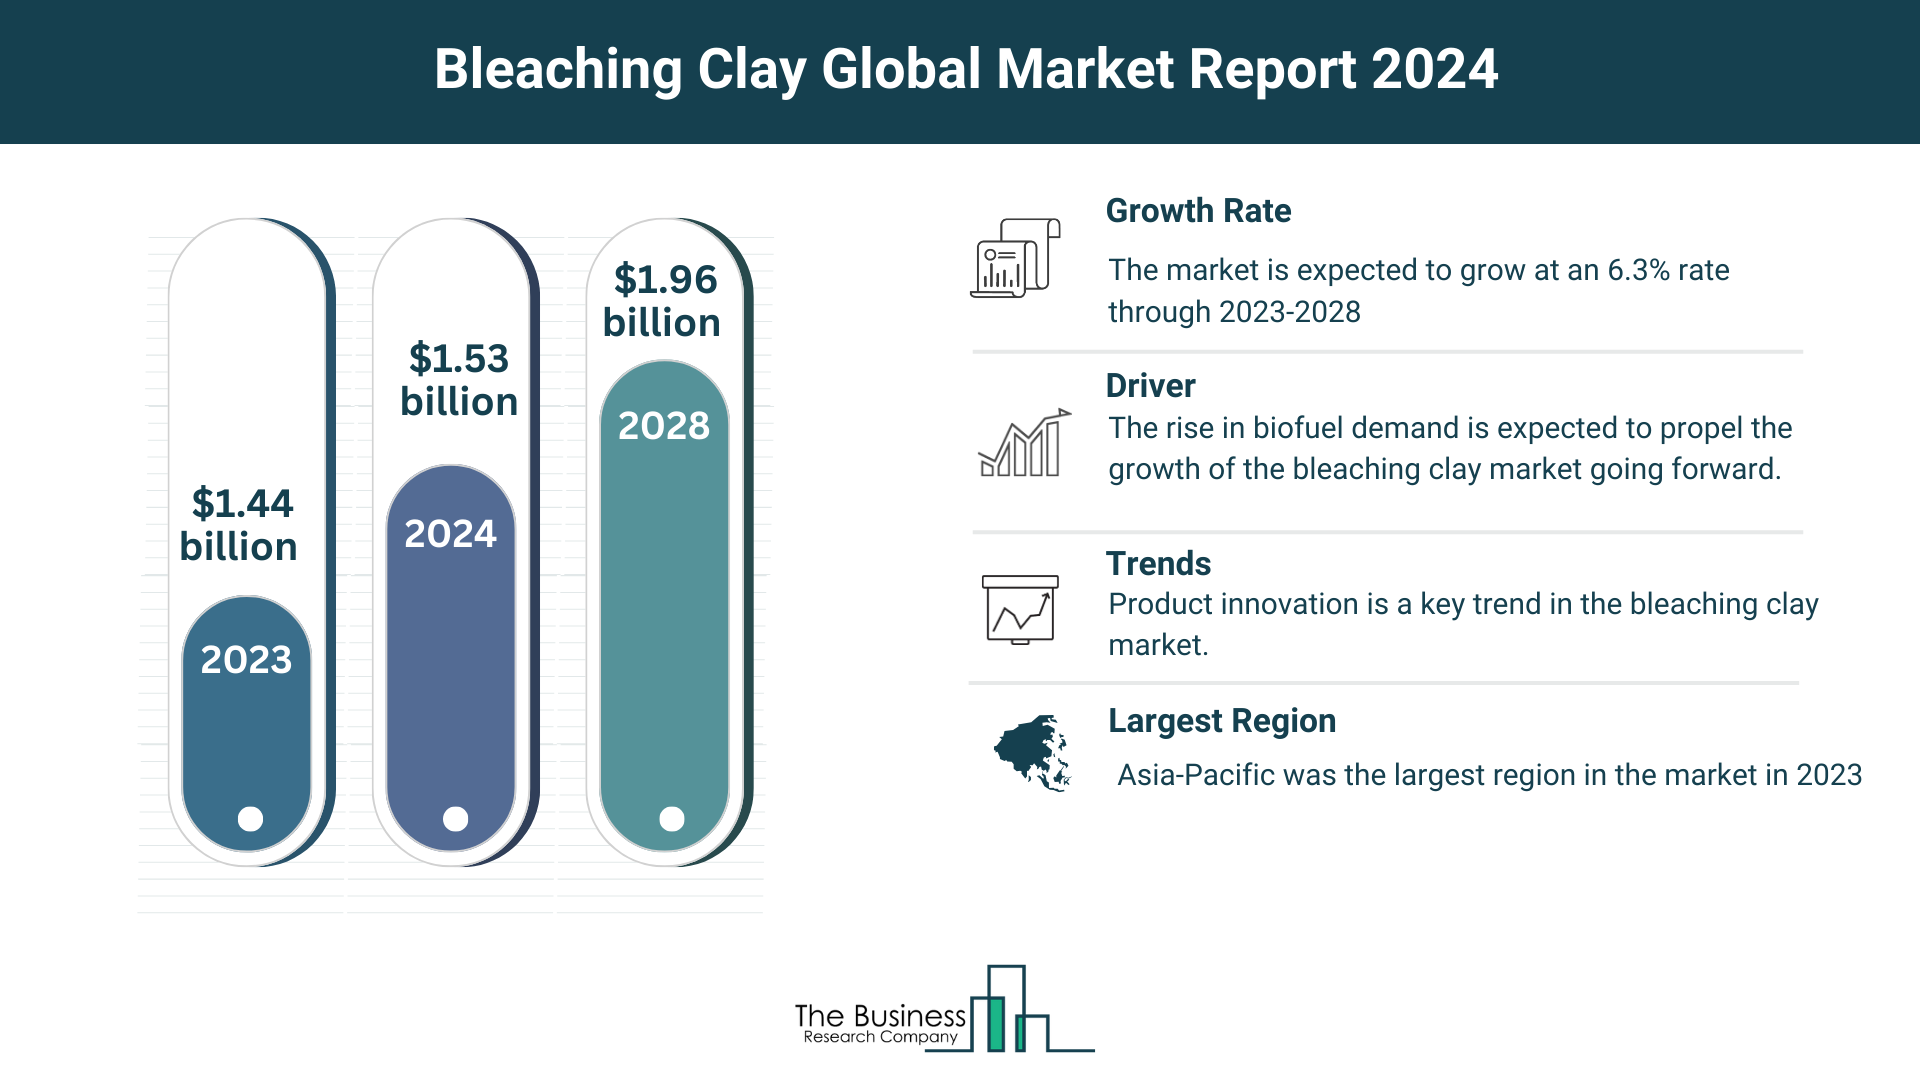 Global Bleaching Clay Market Analysis: Size, Drivers, Trends, Opportunities And Strategies